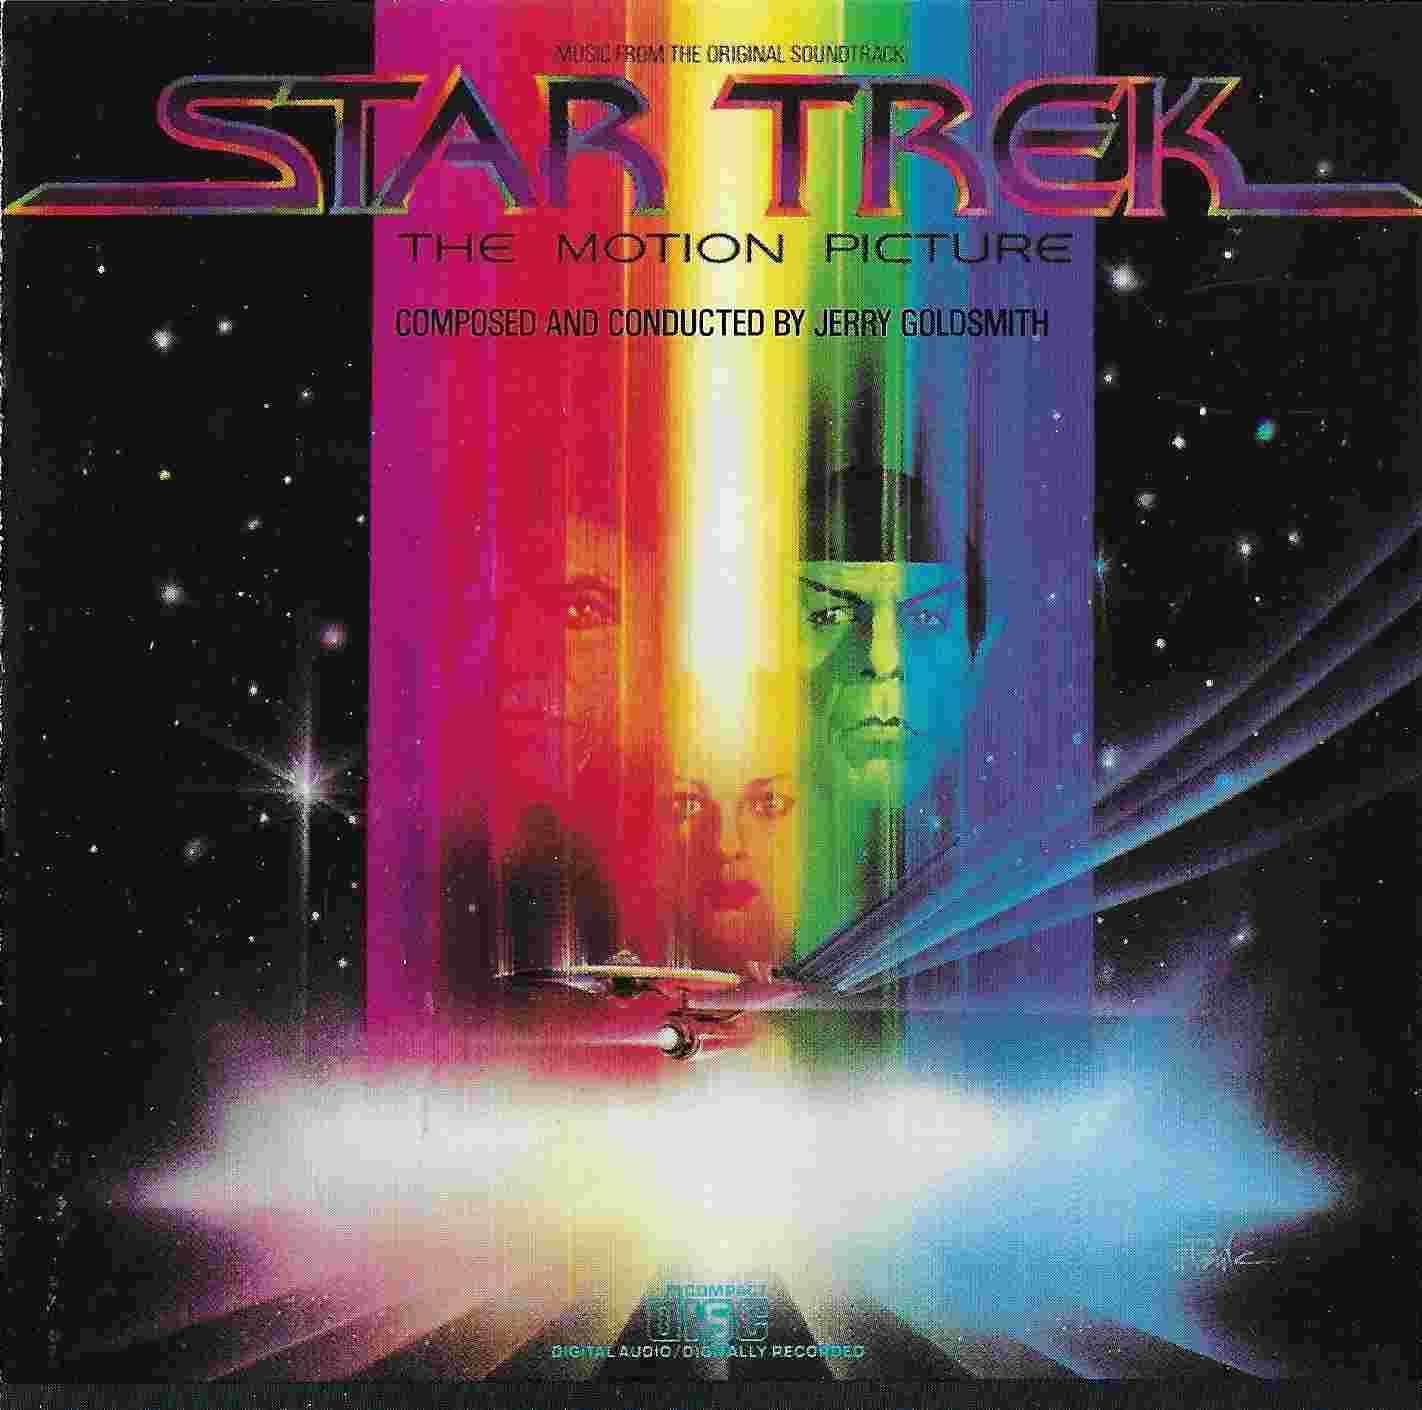 Picture of Star trek - The motion picture by artist Alexander Courrage / Jerry Goldsmith from the BBC cds - Records and Tapes library